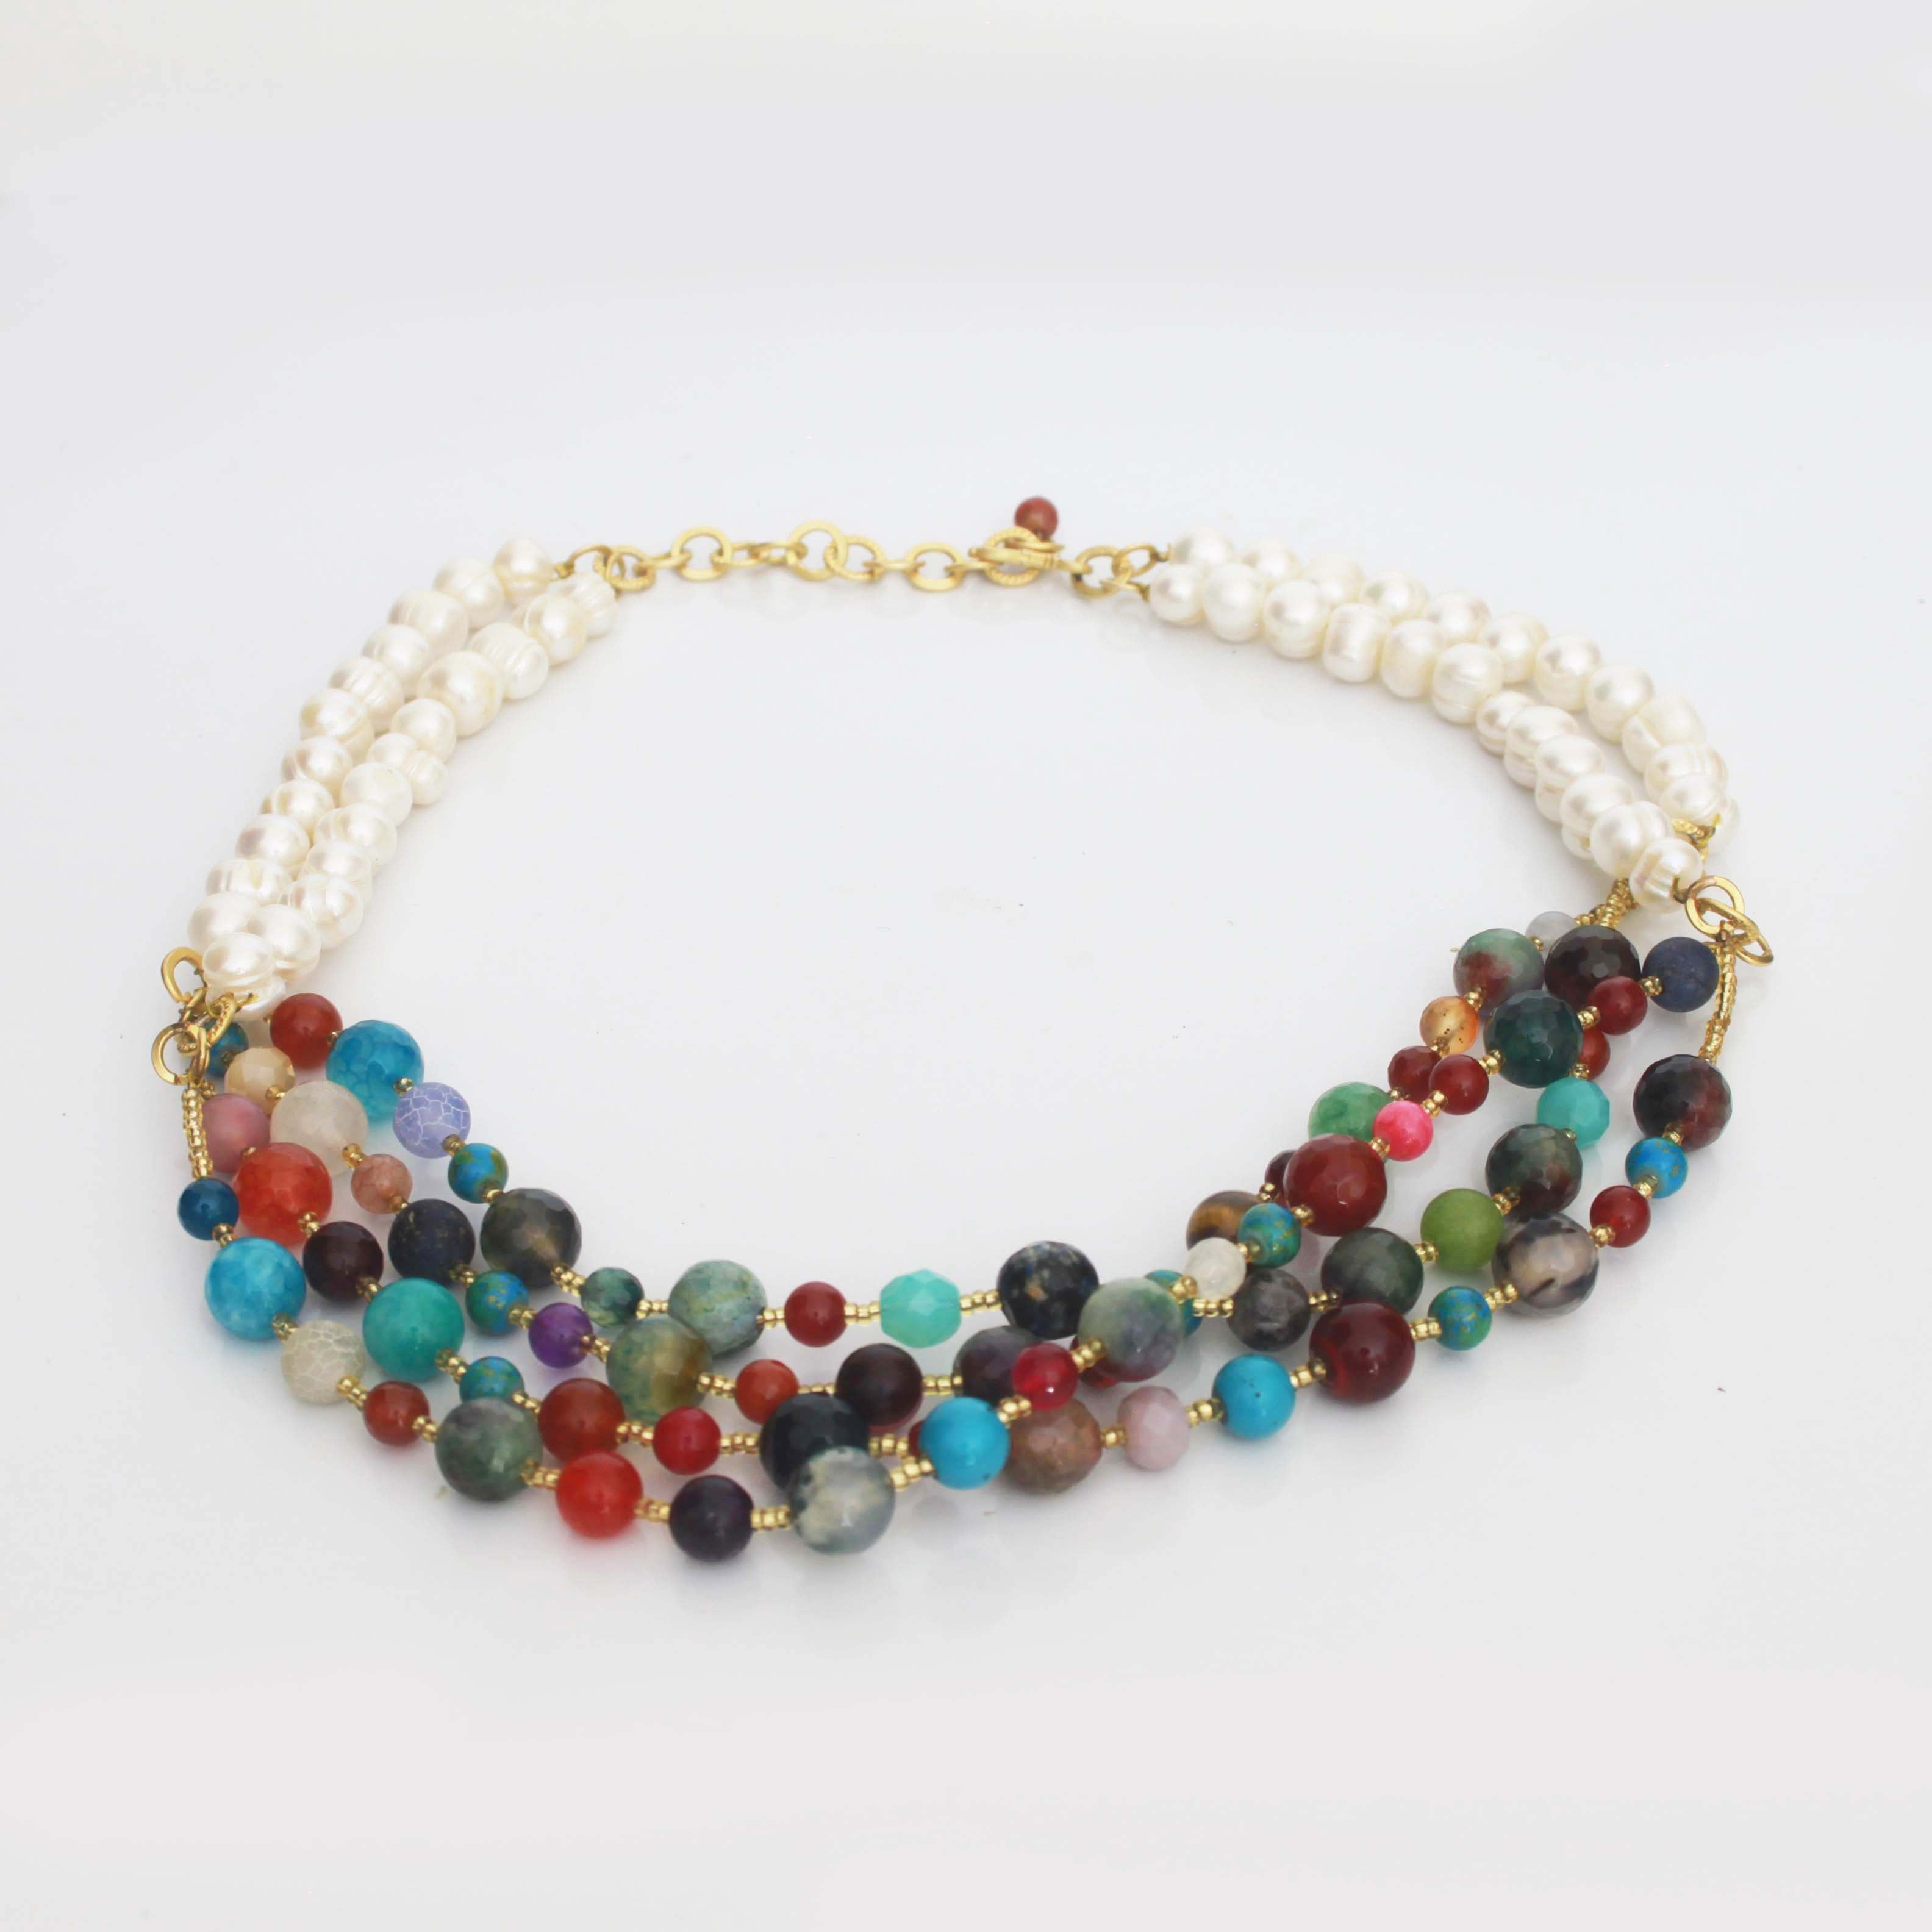 Customized Rainbow and Pearl Beaded Necklace